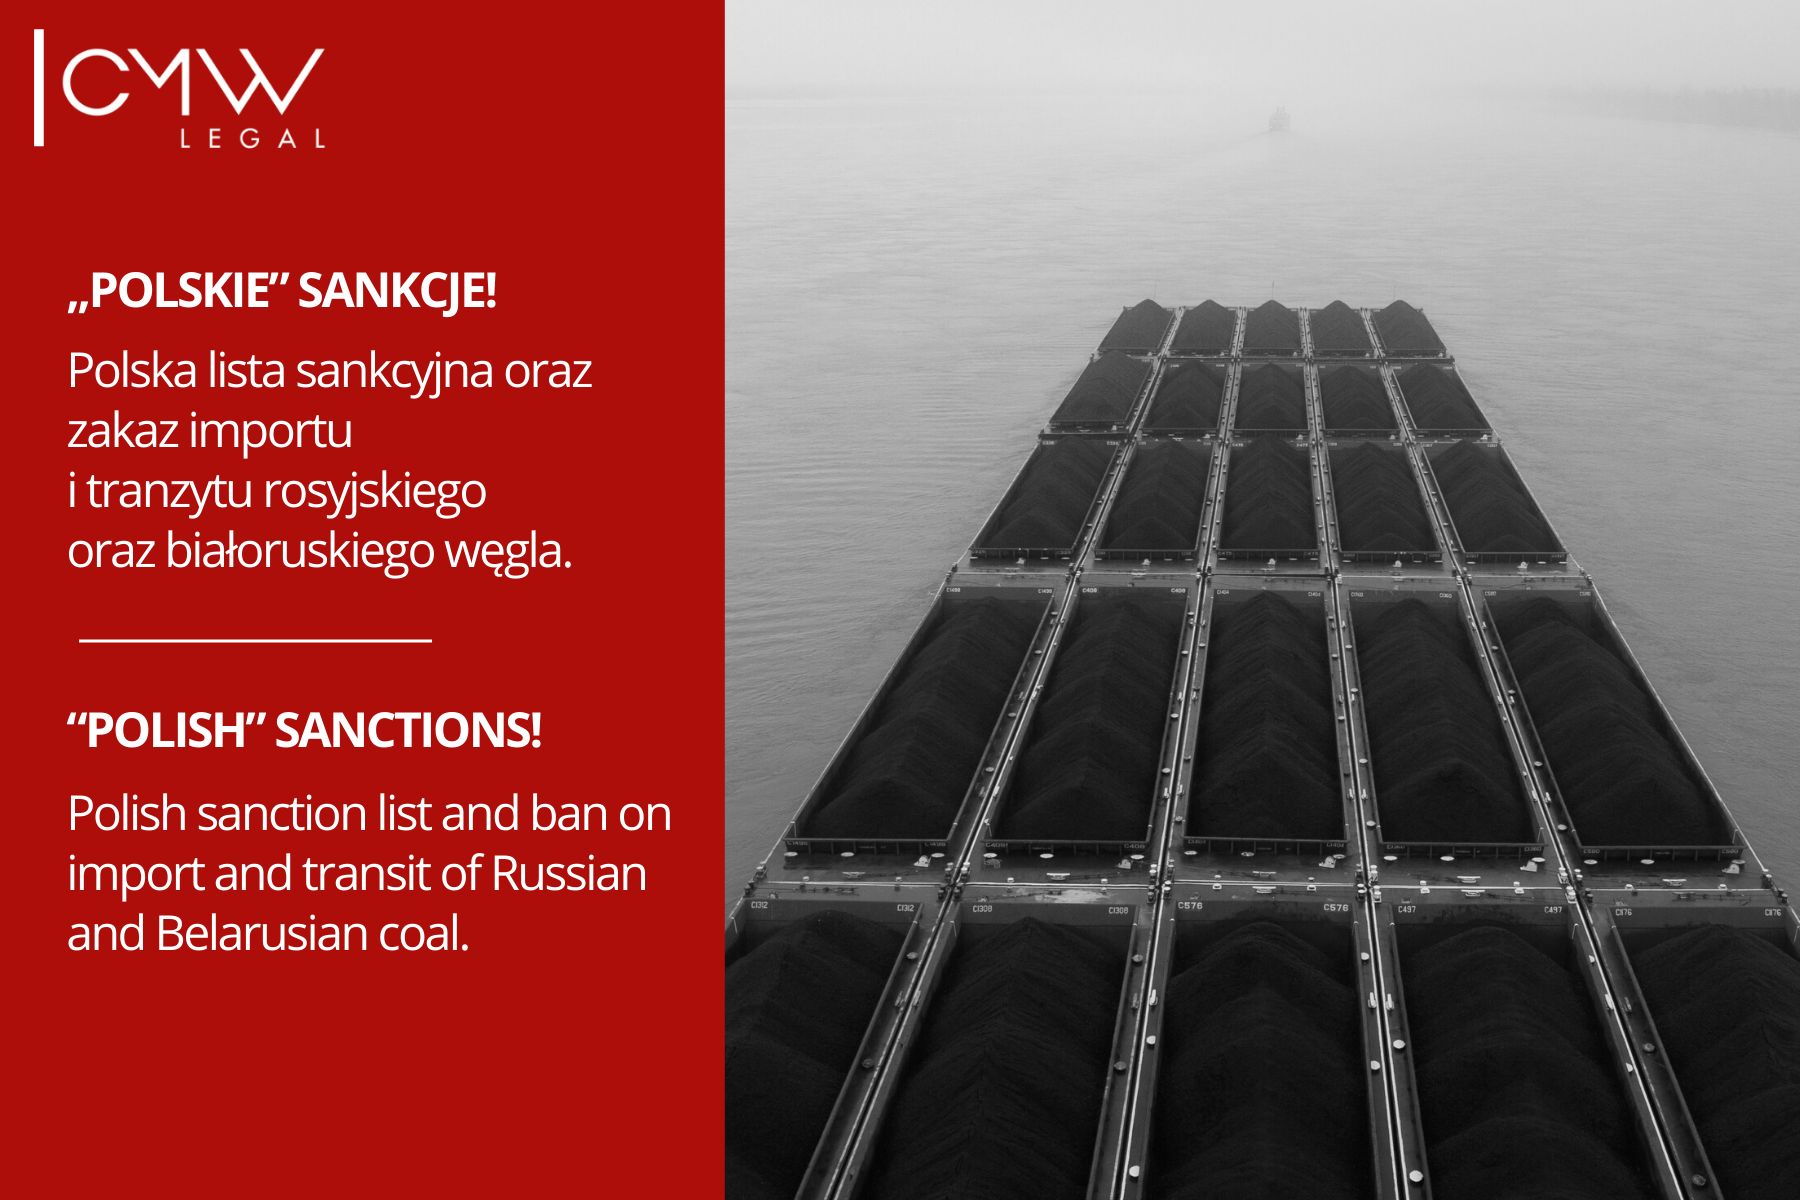  Polish sanction list and ban on import and transit of Russian and Belarusian coal